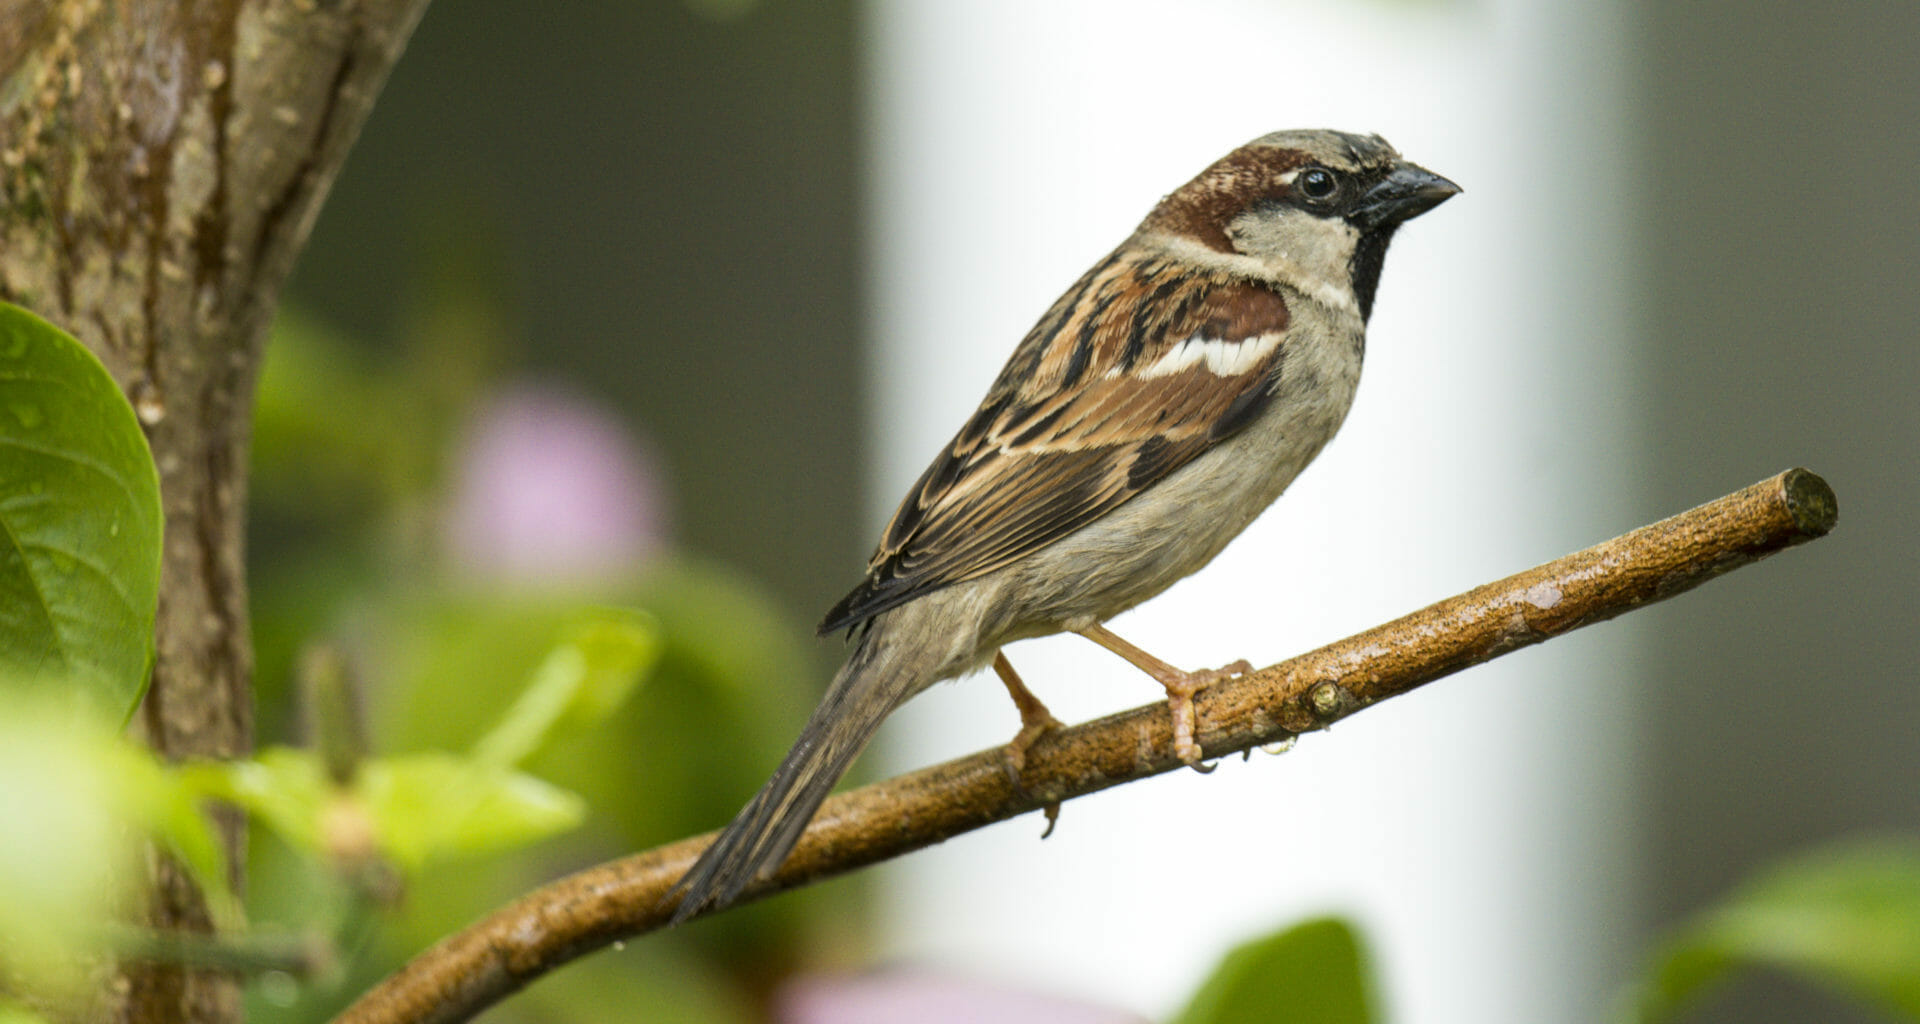 Animal rights groups condemn crude oil experiments on sparrows 4